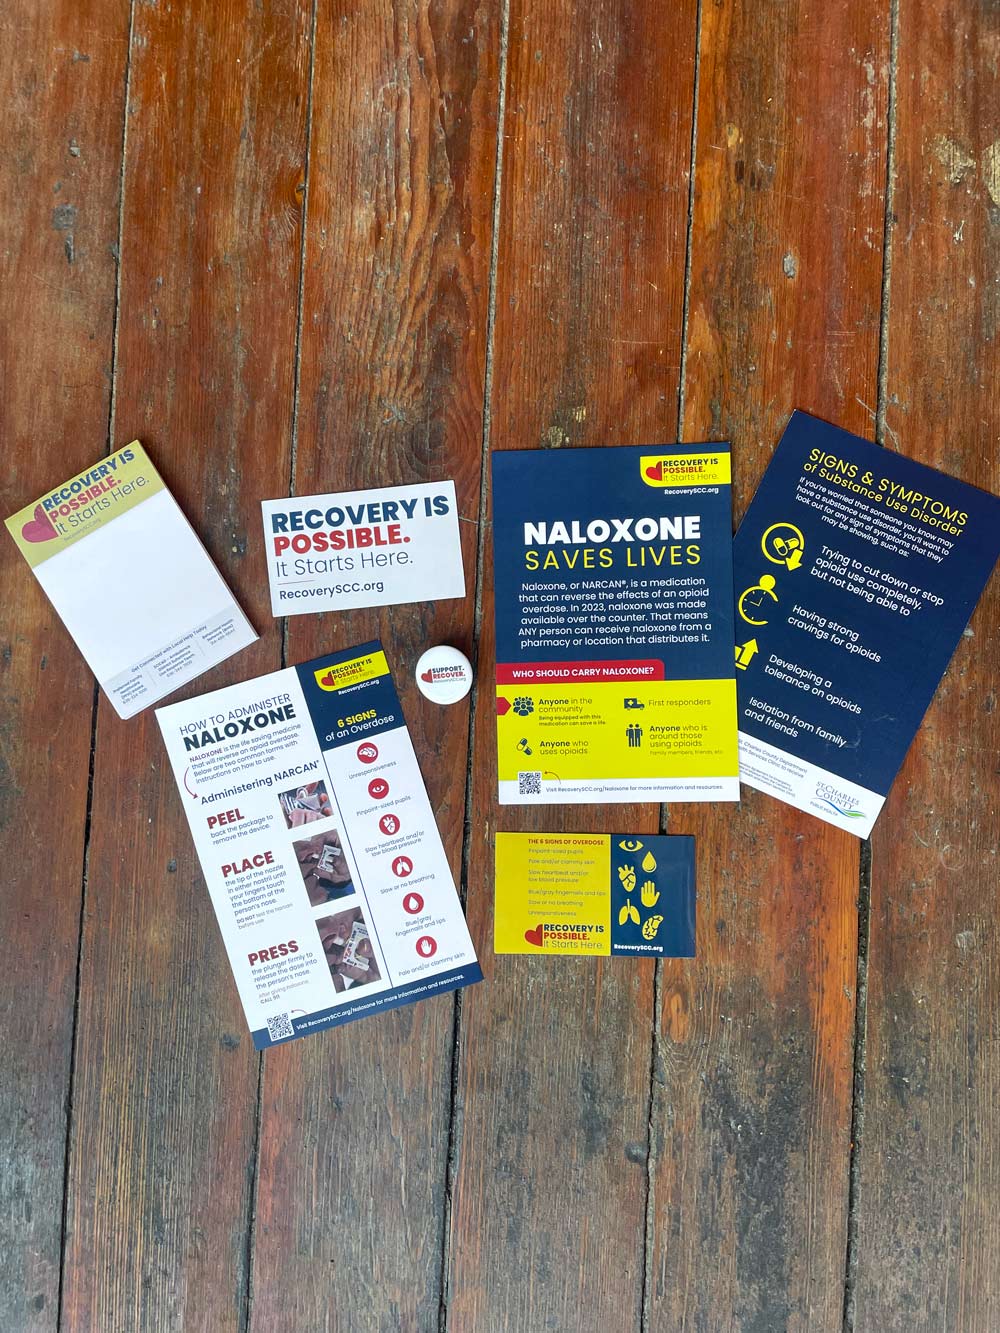 Several Naloxone graphics laid out on a wooden floor